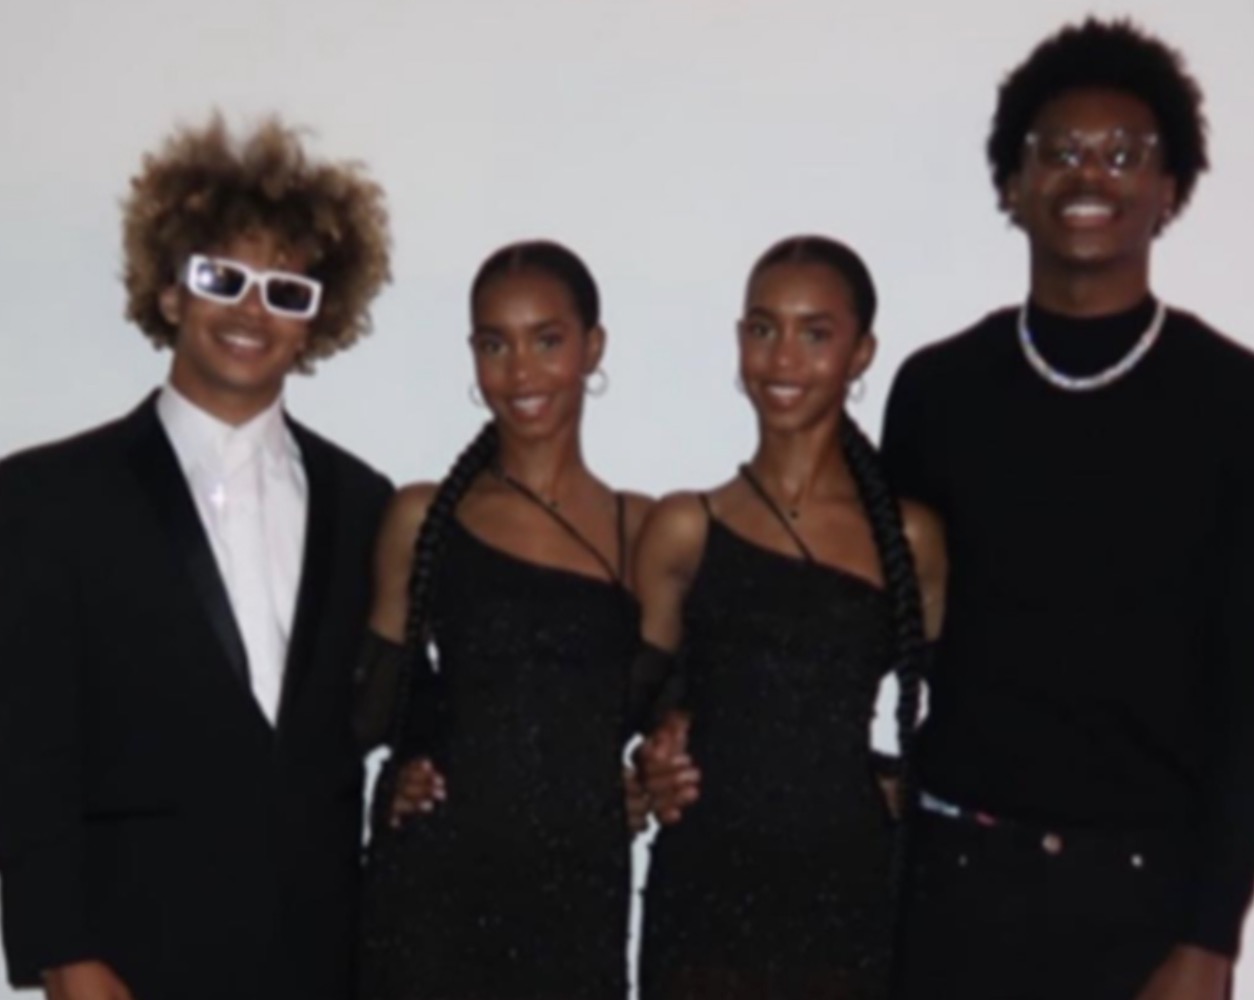 Photos of LeBron’s Son Bryce James Taking Diddy’s Daughter D’Lila Combs to Homecoming